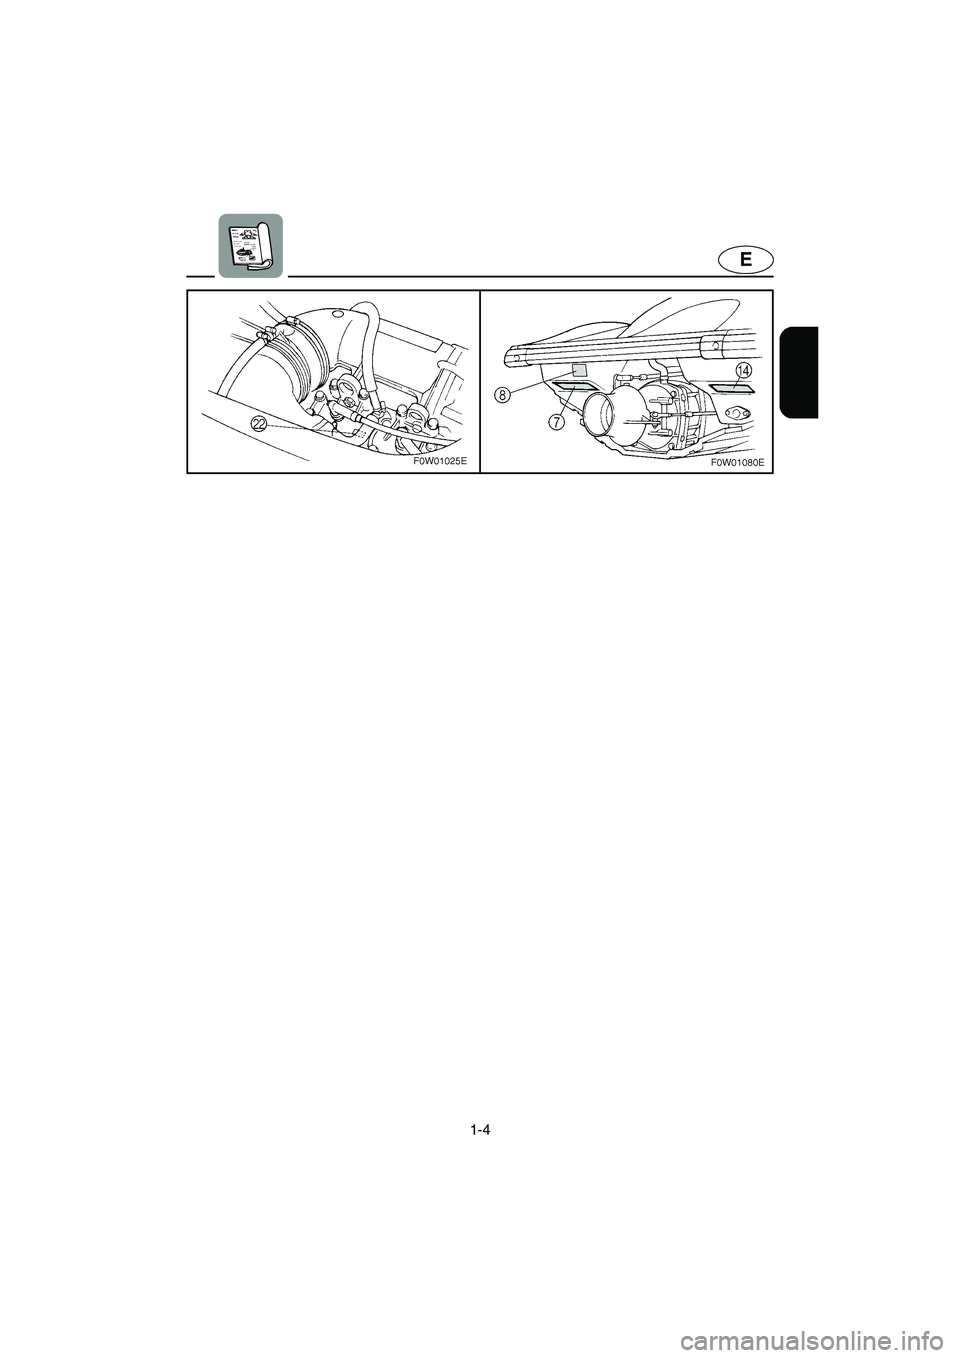 YAMAHA GP800R 2002 User Guide 1-4
E
UF0W71.book  Page 4  Thursday, August 30, 2001  3:46 PM 